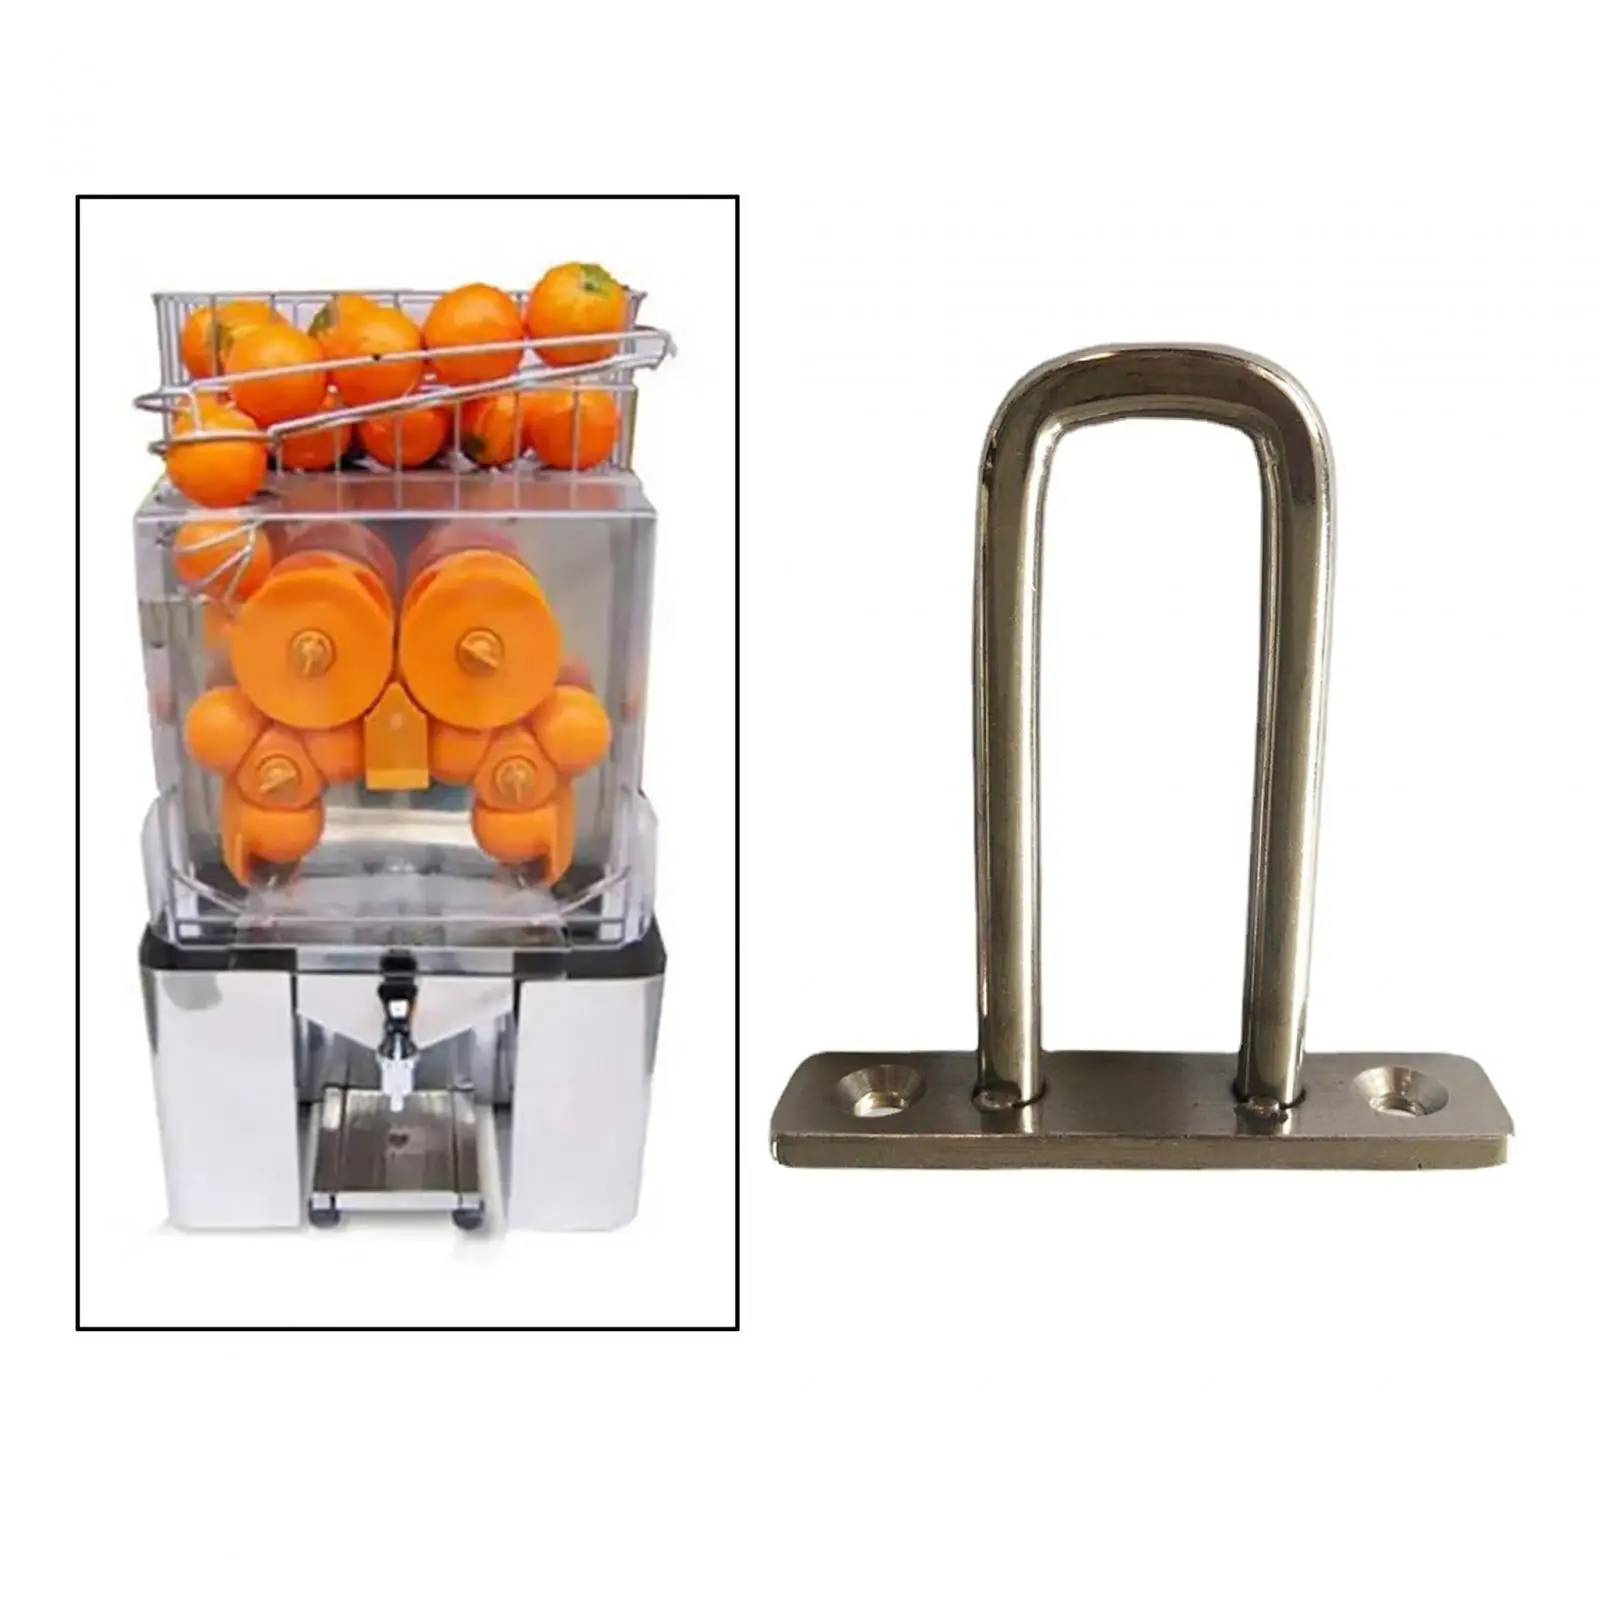 Electric Orange Juicer Machine Parts 1 Piece Juicer Supply Knife Combination Bracket Easy to Use Support Accessory for XC-2000E